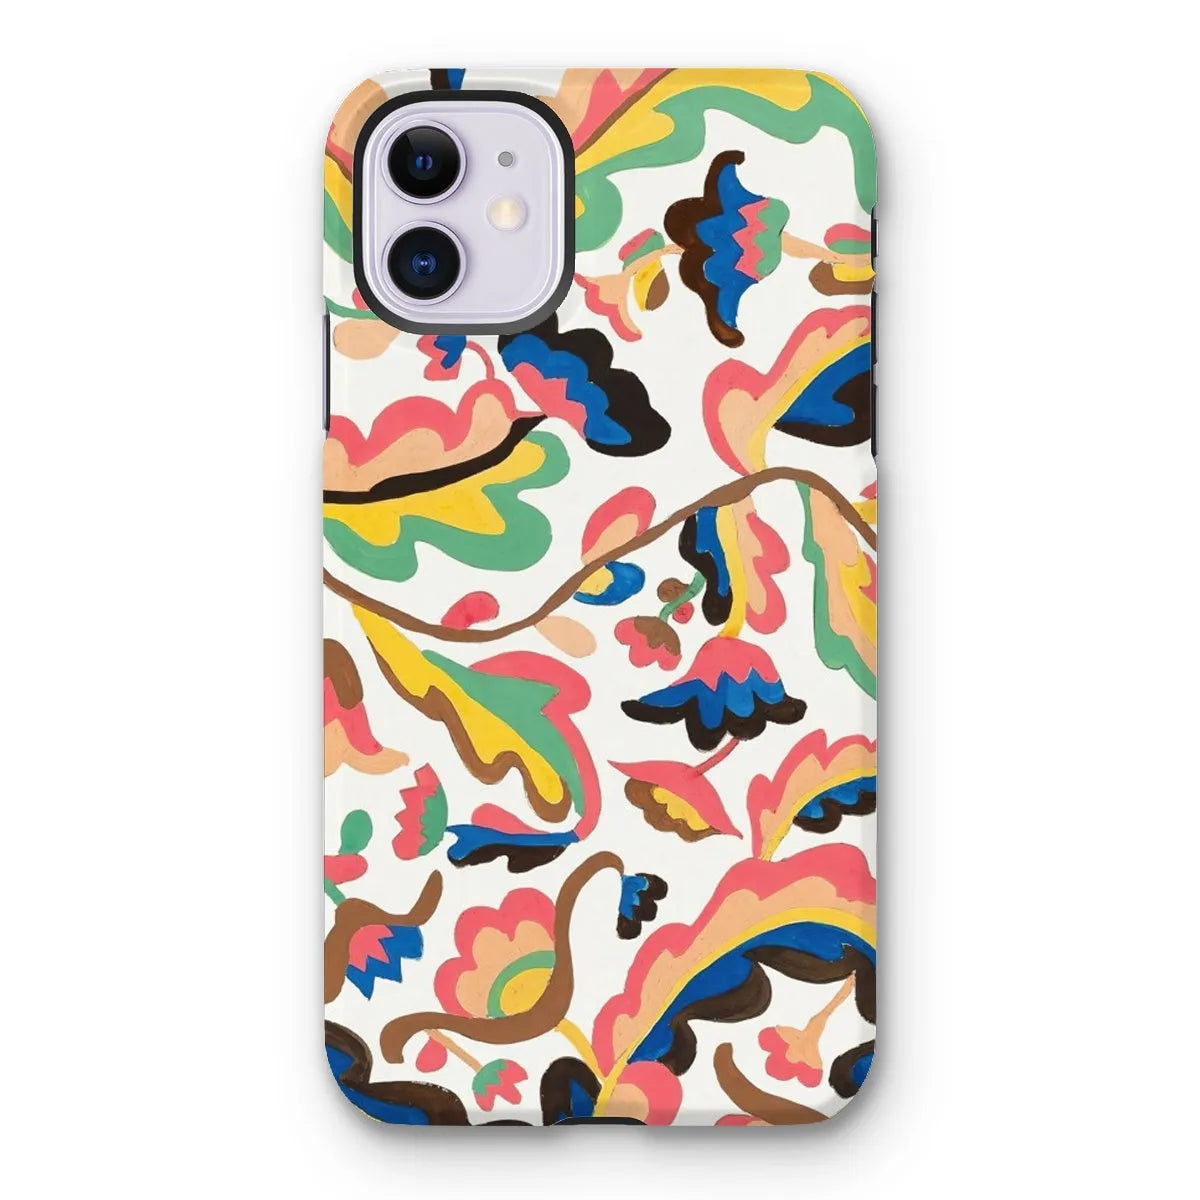 Colcha Floral Aesthetic Pattern Phone Case - Etna Wiswall - Iphone 11 / Matte - Mobile Phone Cases - Aesthetic Art